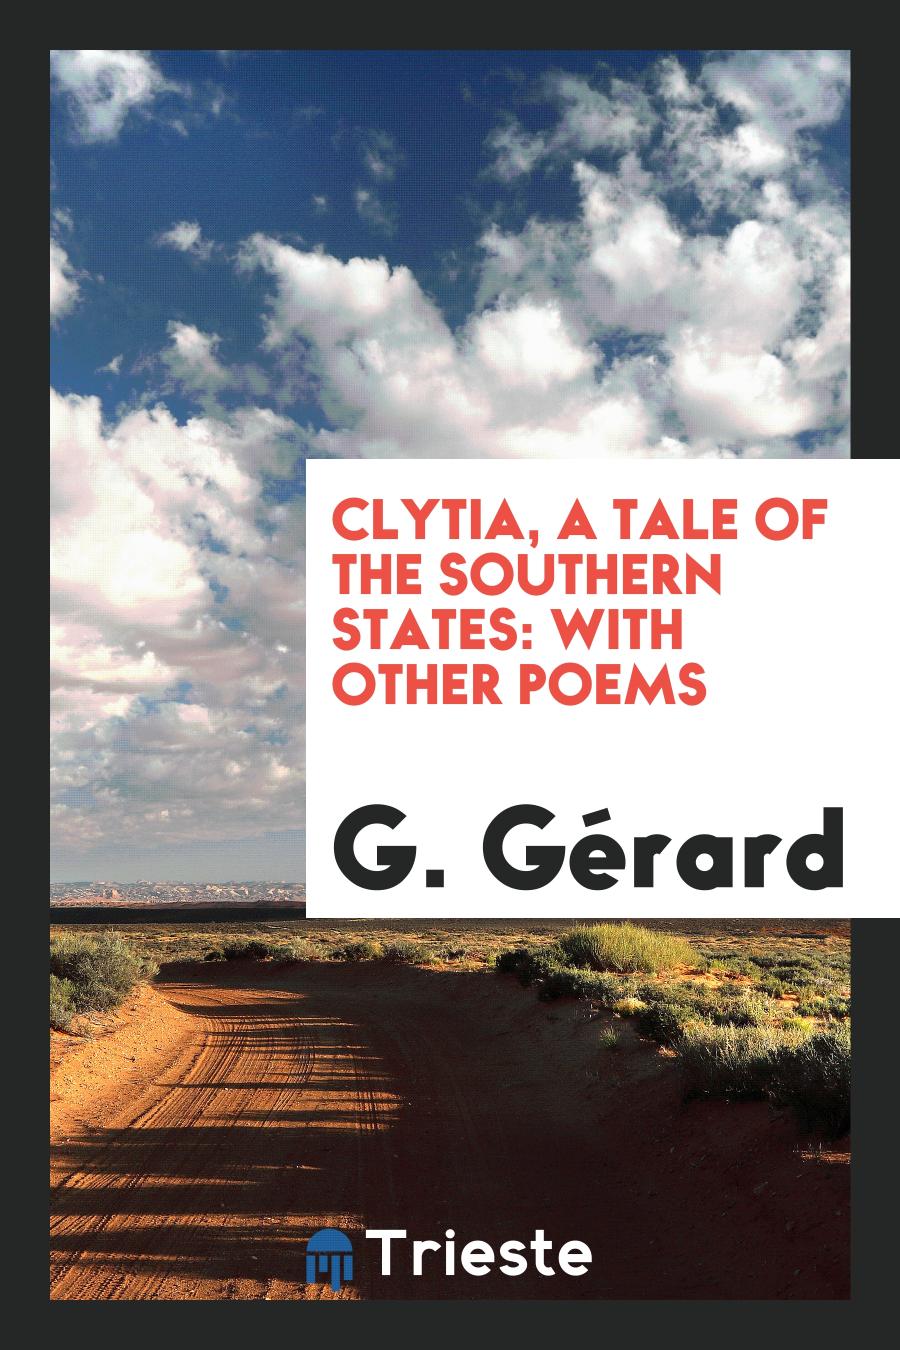 Clytia, a Tale of the Southern States: With Other Poems